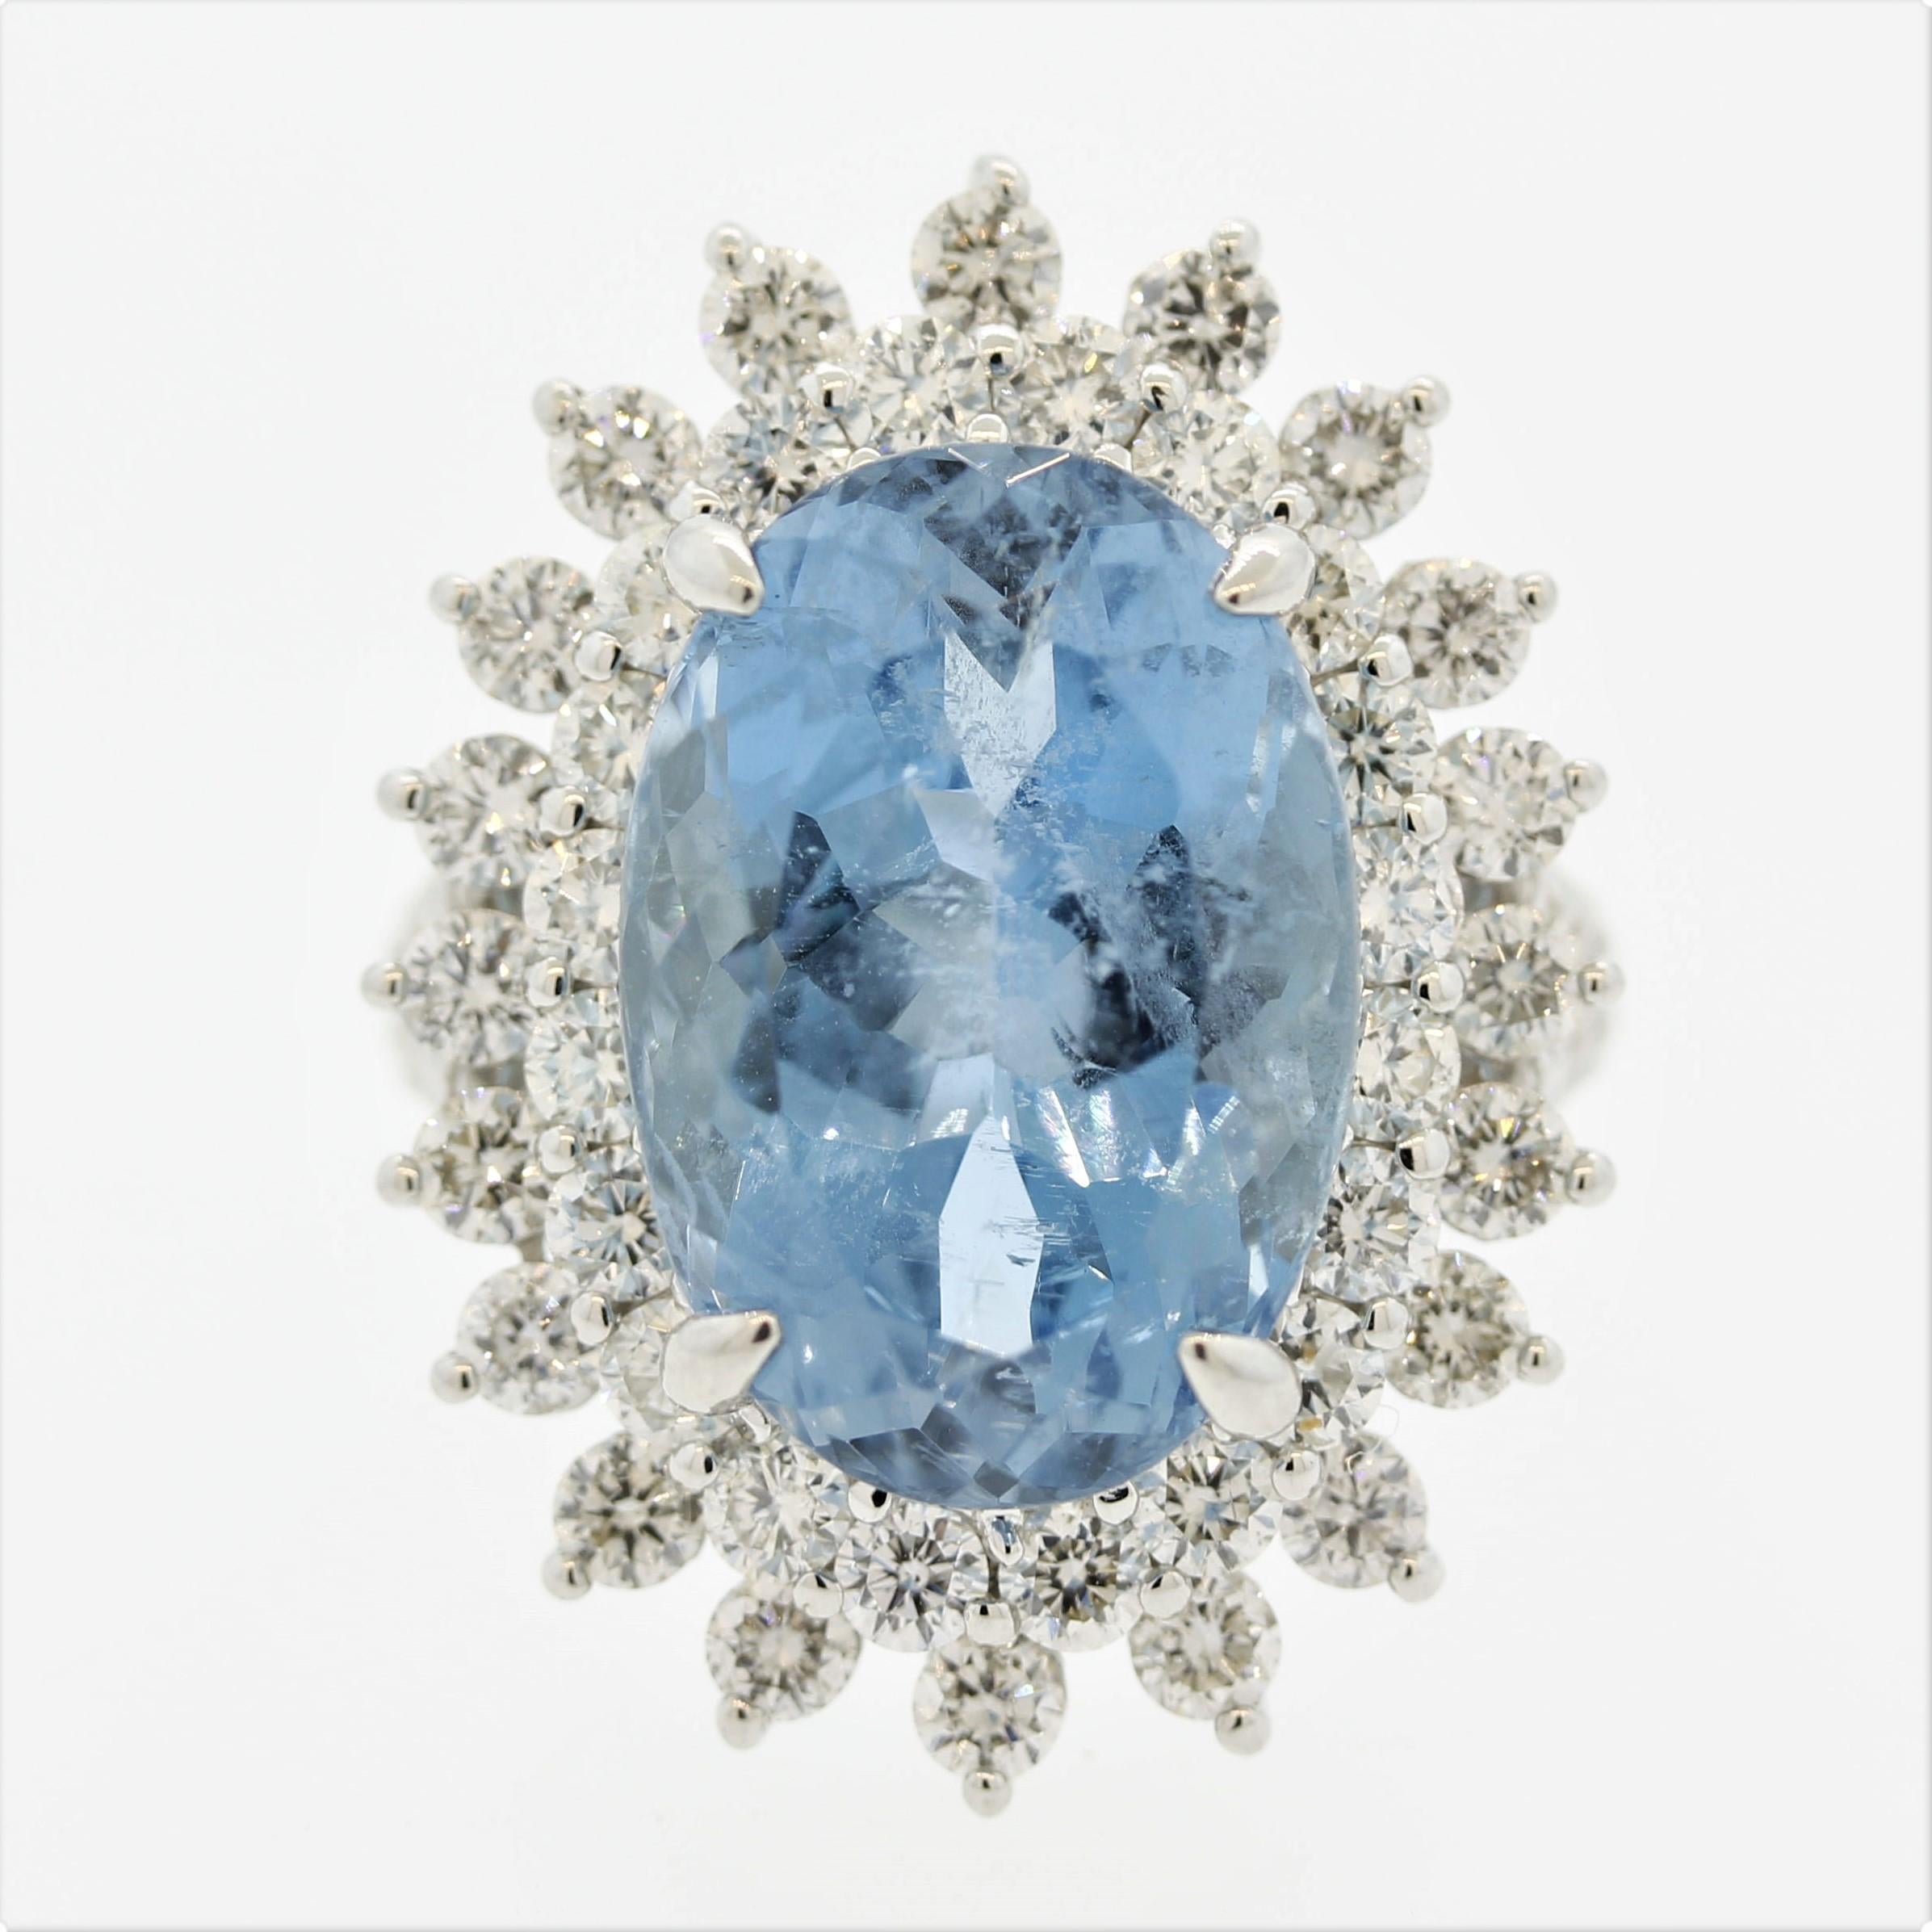 A lovely and substantial ring featuring a 11.72 carat aquamarine with the ideal gem blue color. The top-quality stones in the trade are referred to as “Santa Maria” which refers to the best pocket of aquamarines found a century ago in Brazil. This